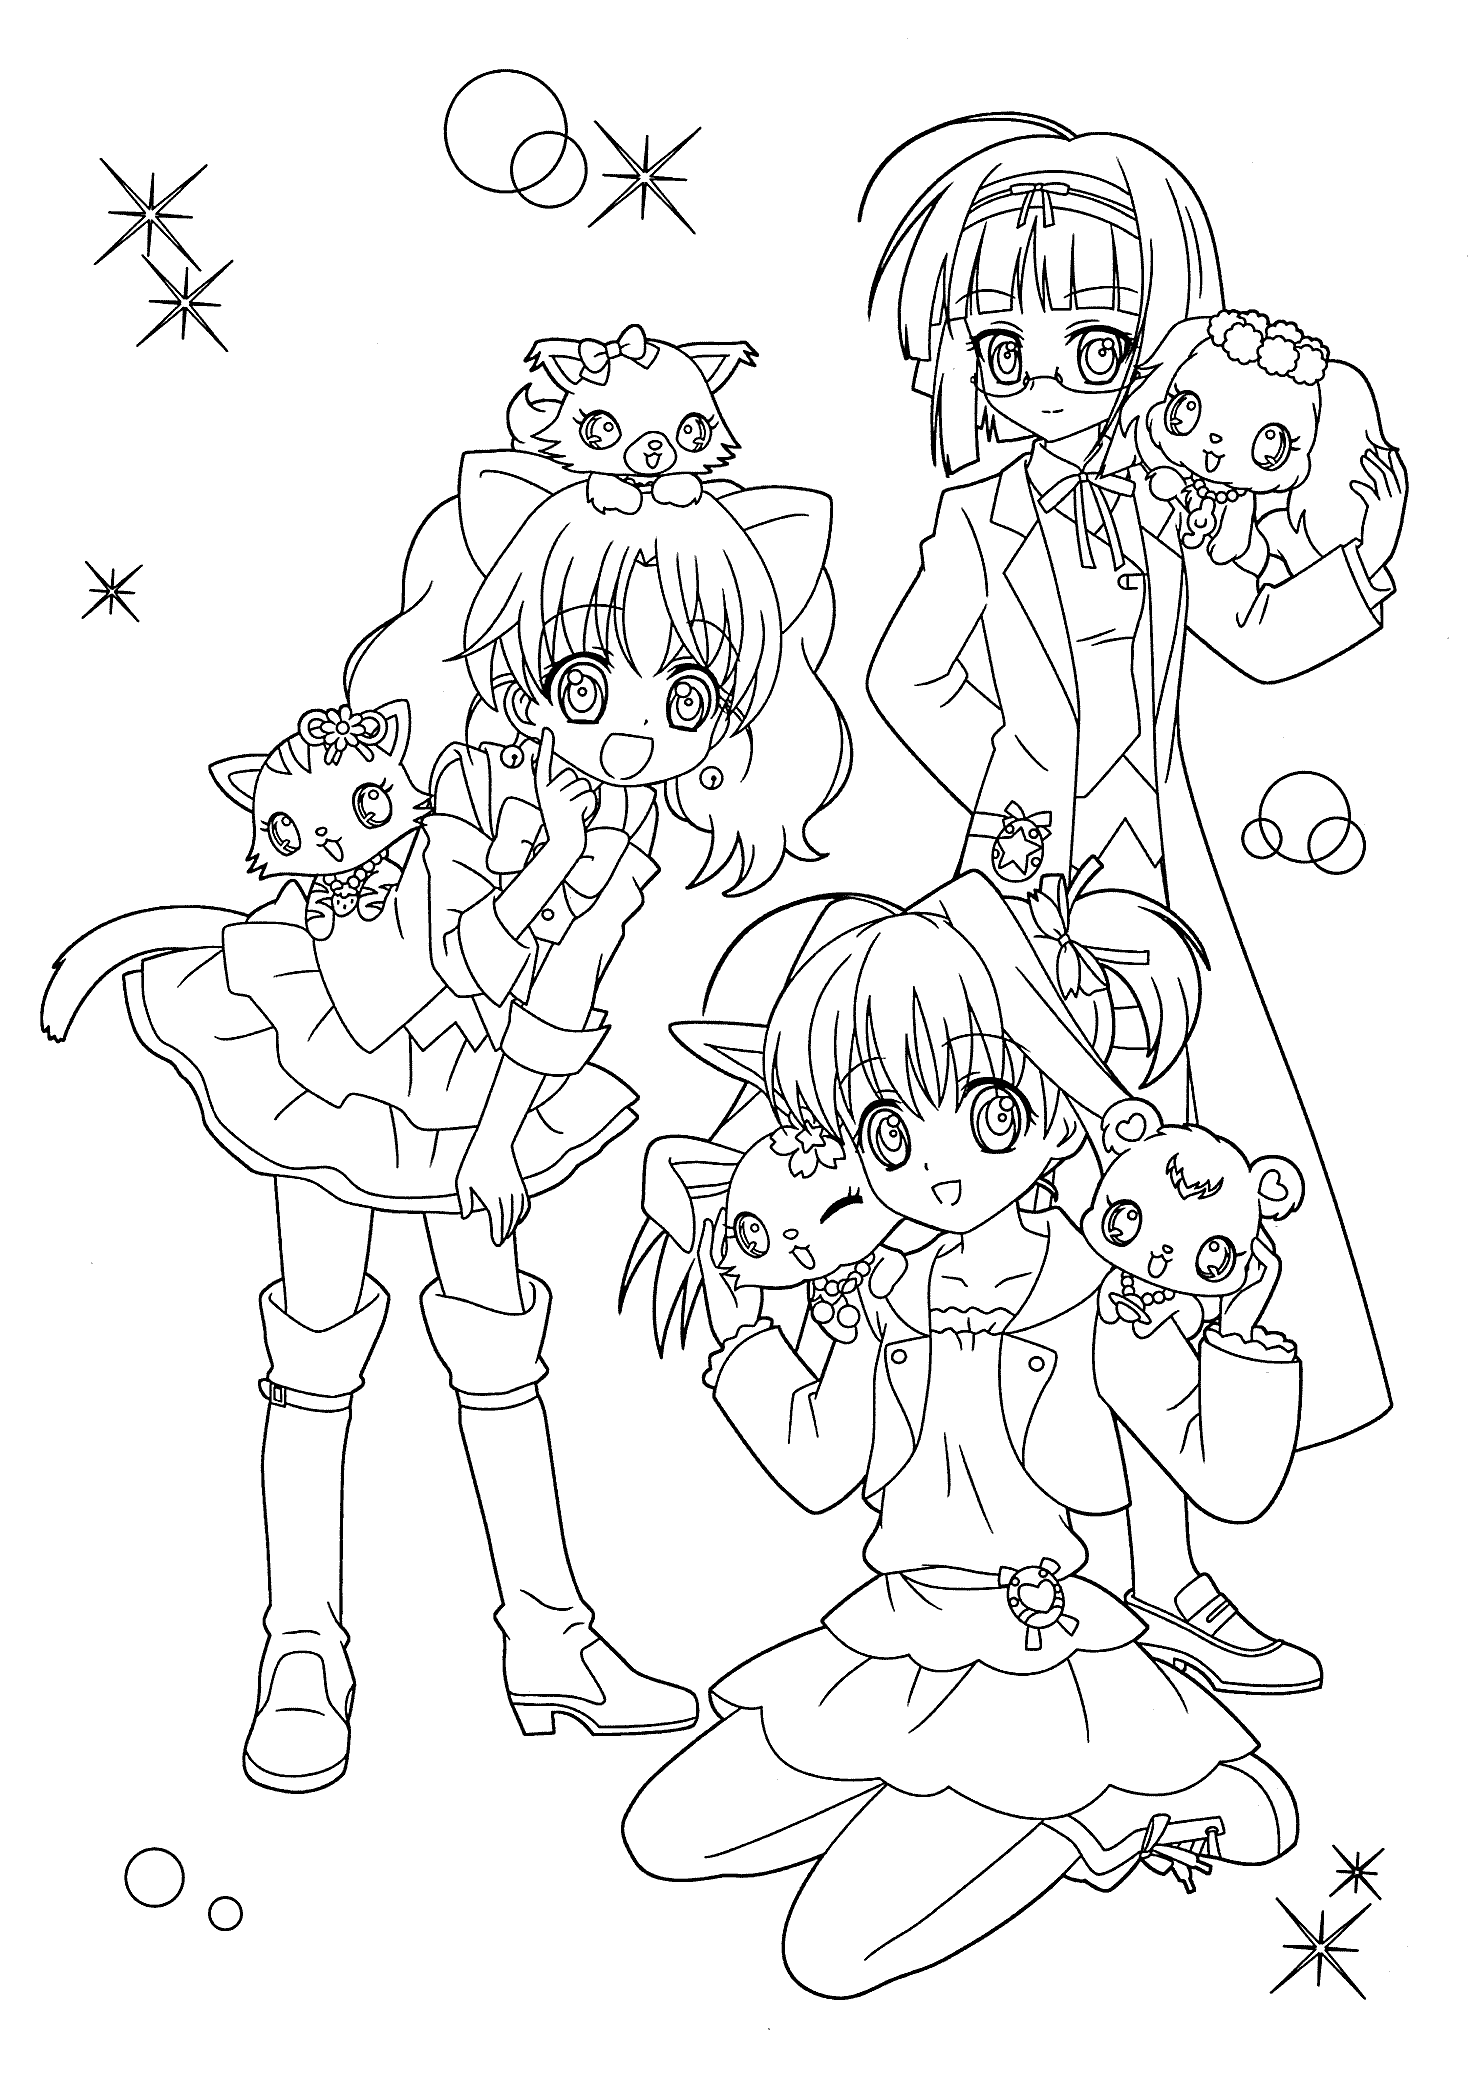 anime coloring pages printable manga coloring pages to download and print for free pages anime coloring printable 